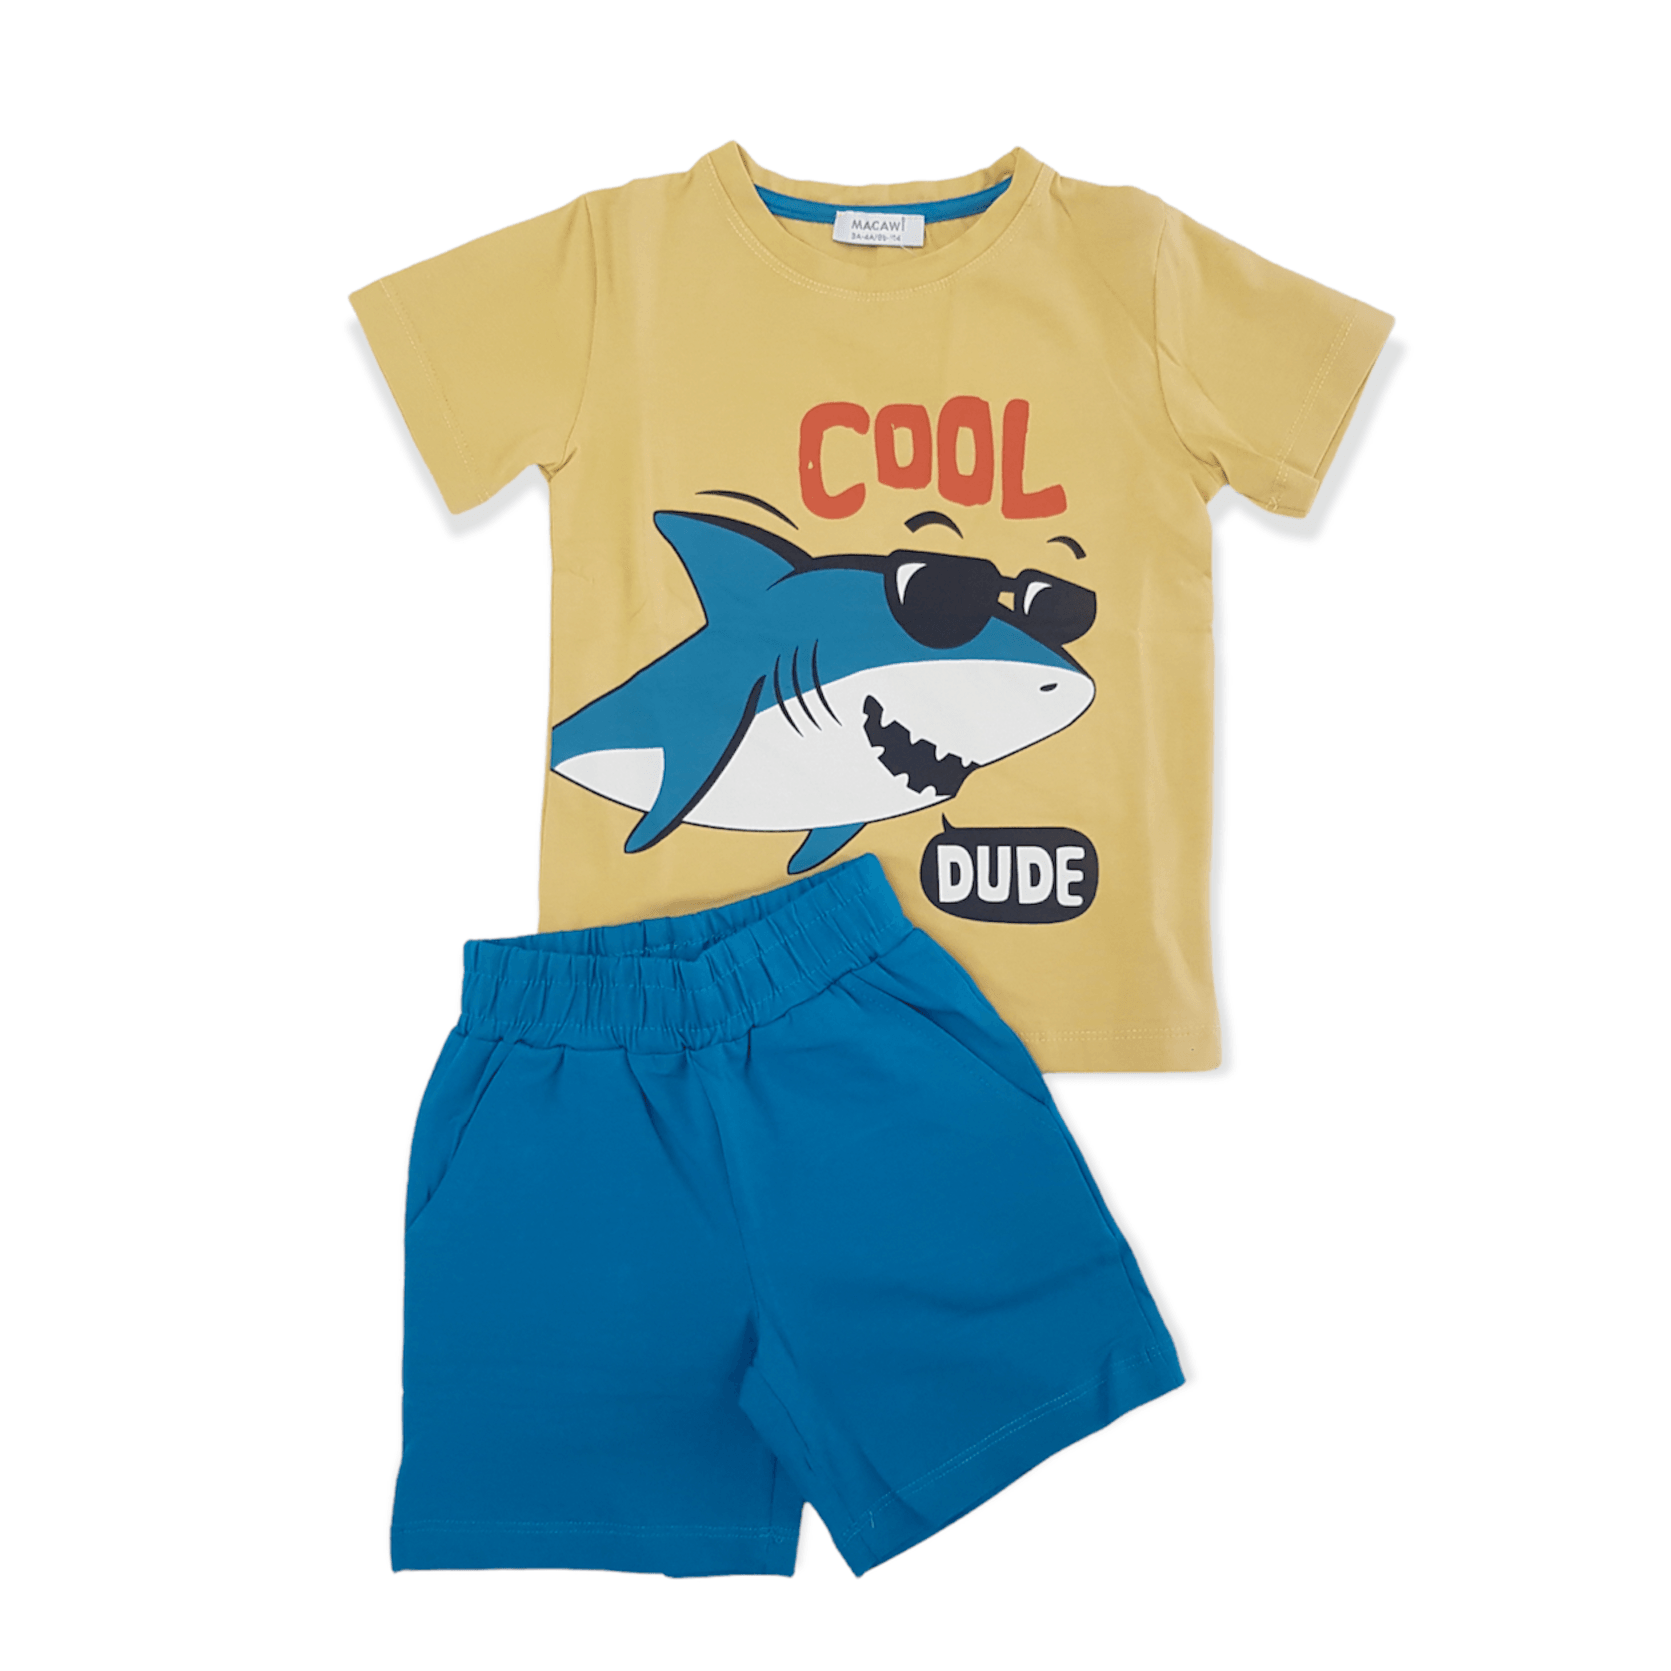 Cool Dude Shark Set - Cool Dude Shark Set - 3-4 Years / Yellow / Cotton - Macawi - Melymod